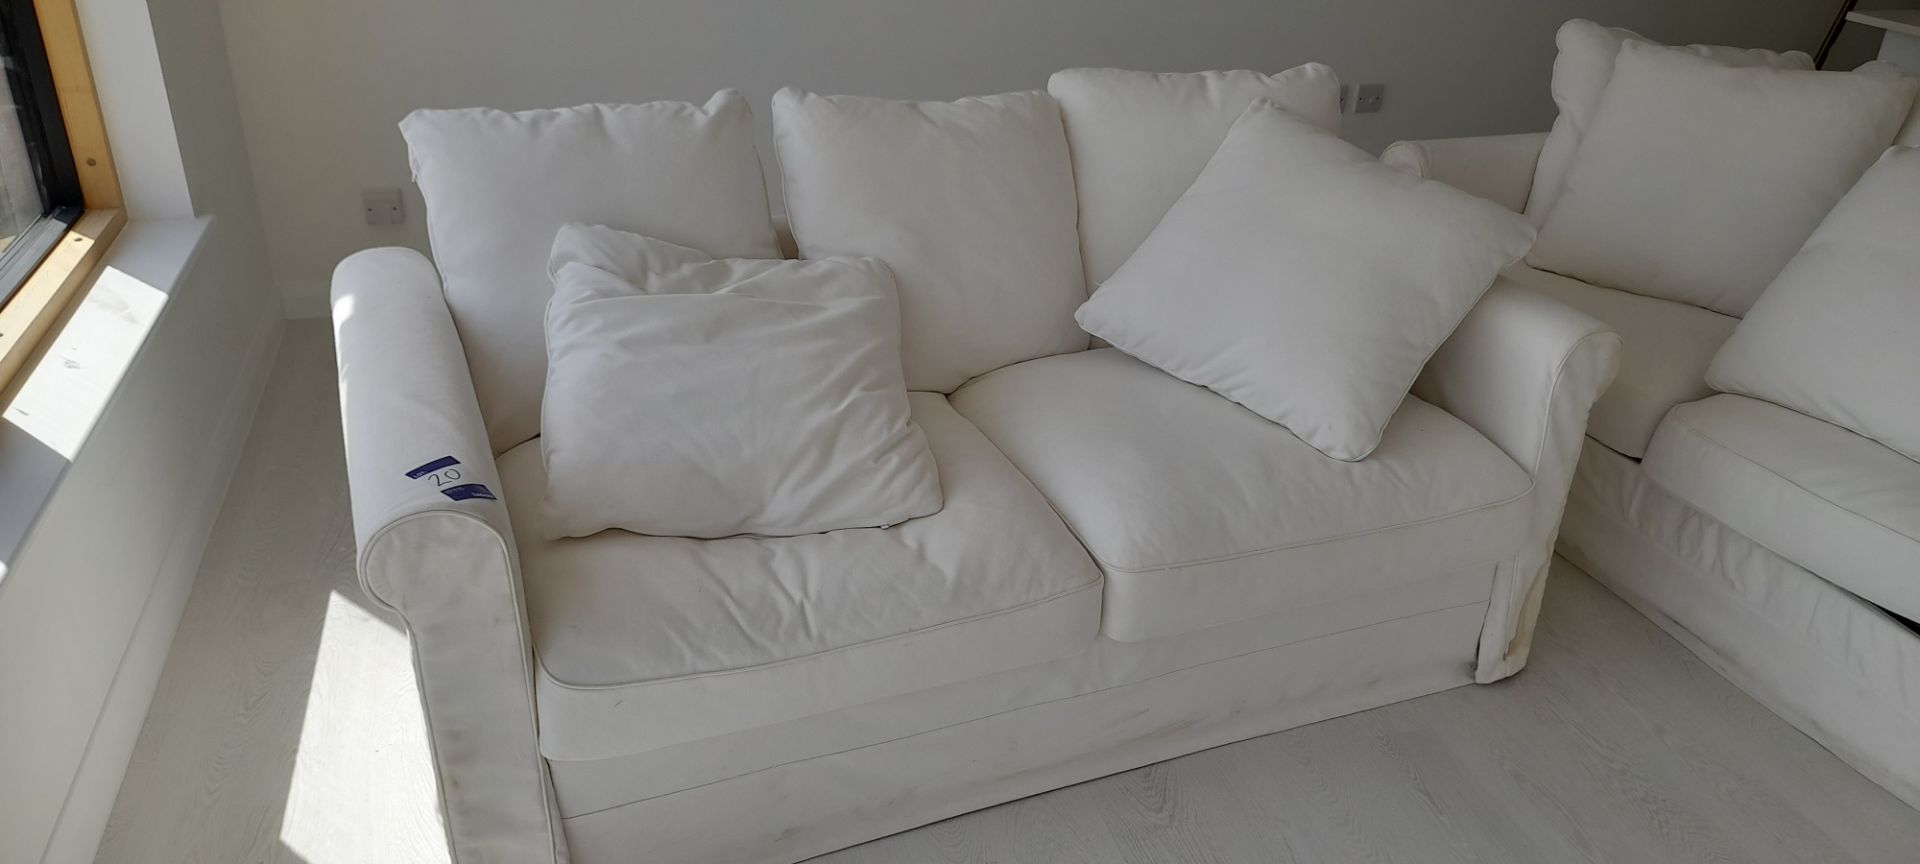 Double Sofa with Pull Out Bed & 7 x White Linen Dining Chairs (Located on 2nd floor) - Image 2 of 6